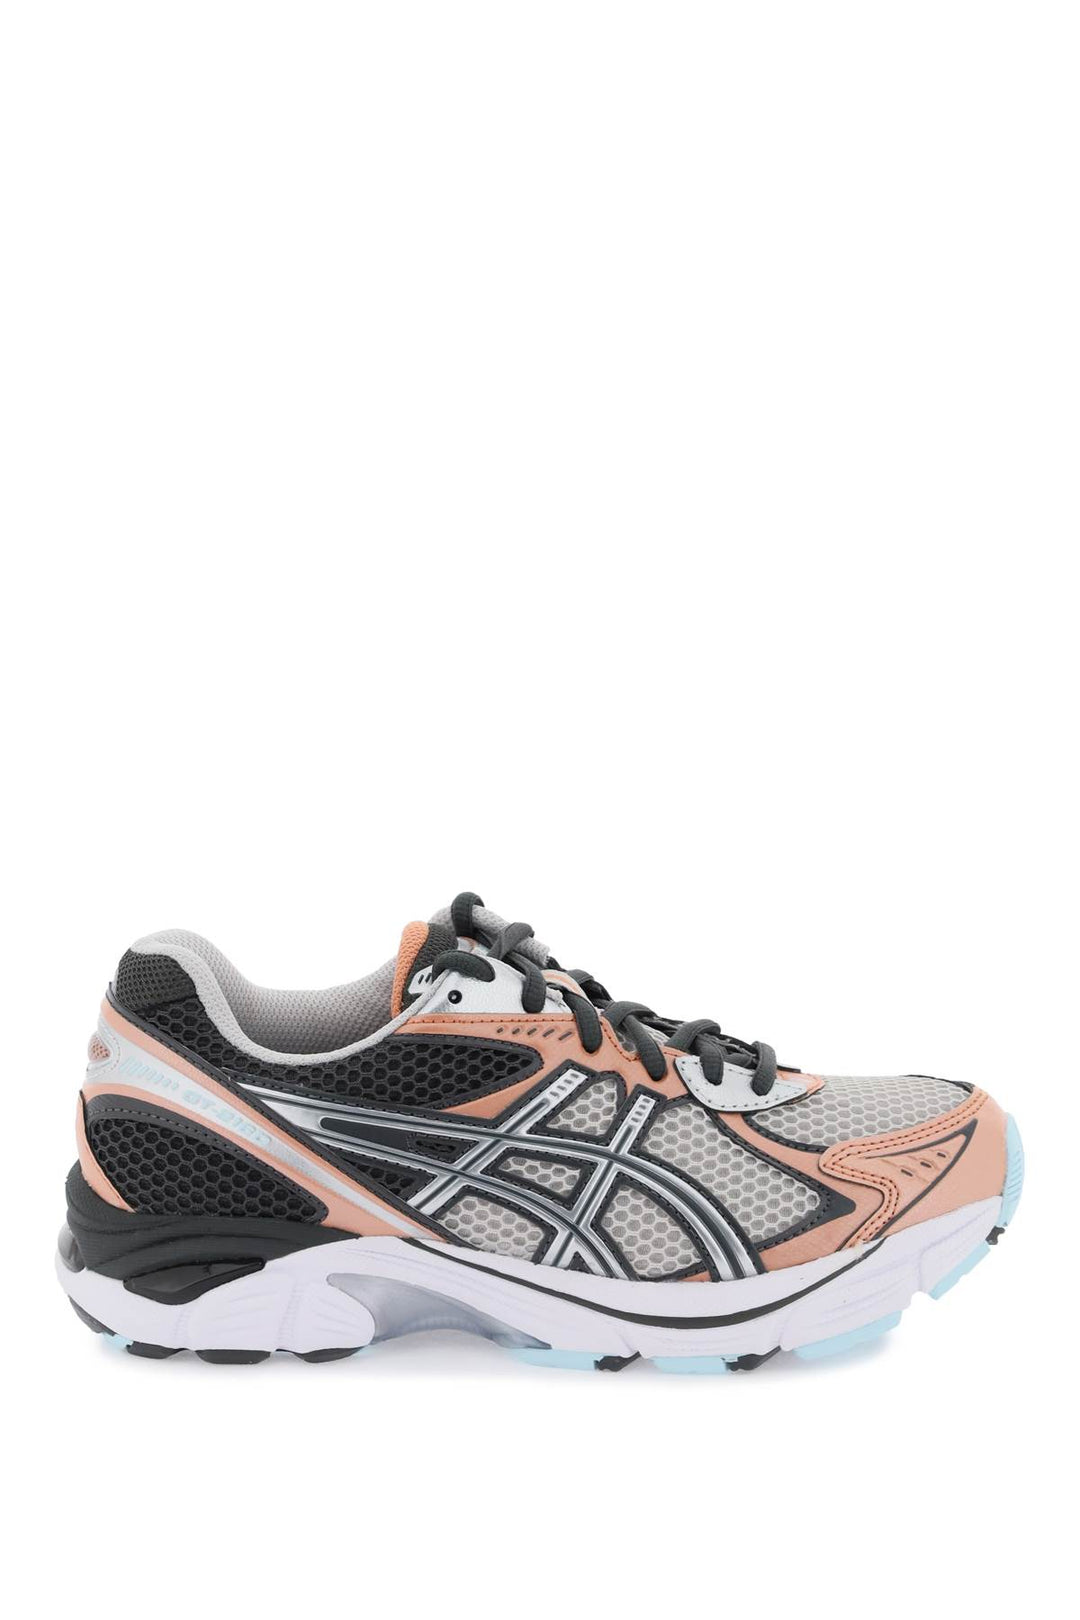 Sneakers Gt 2160 - Asics - Donna